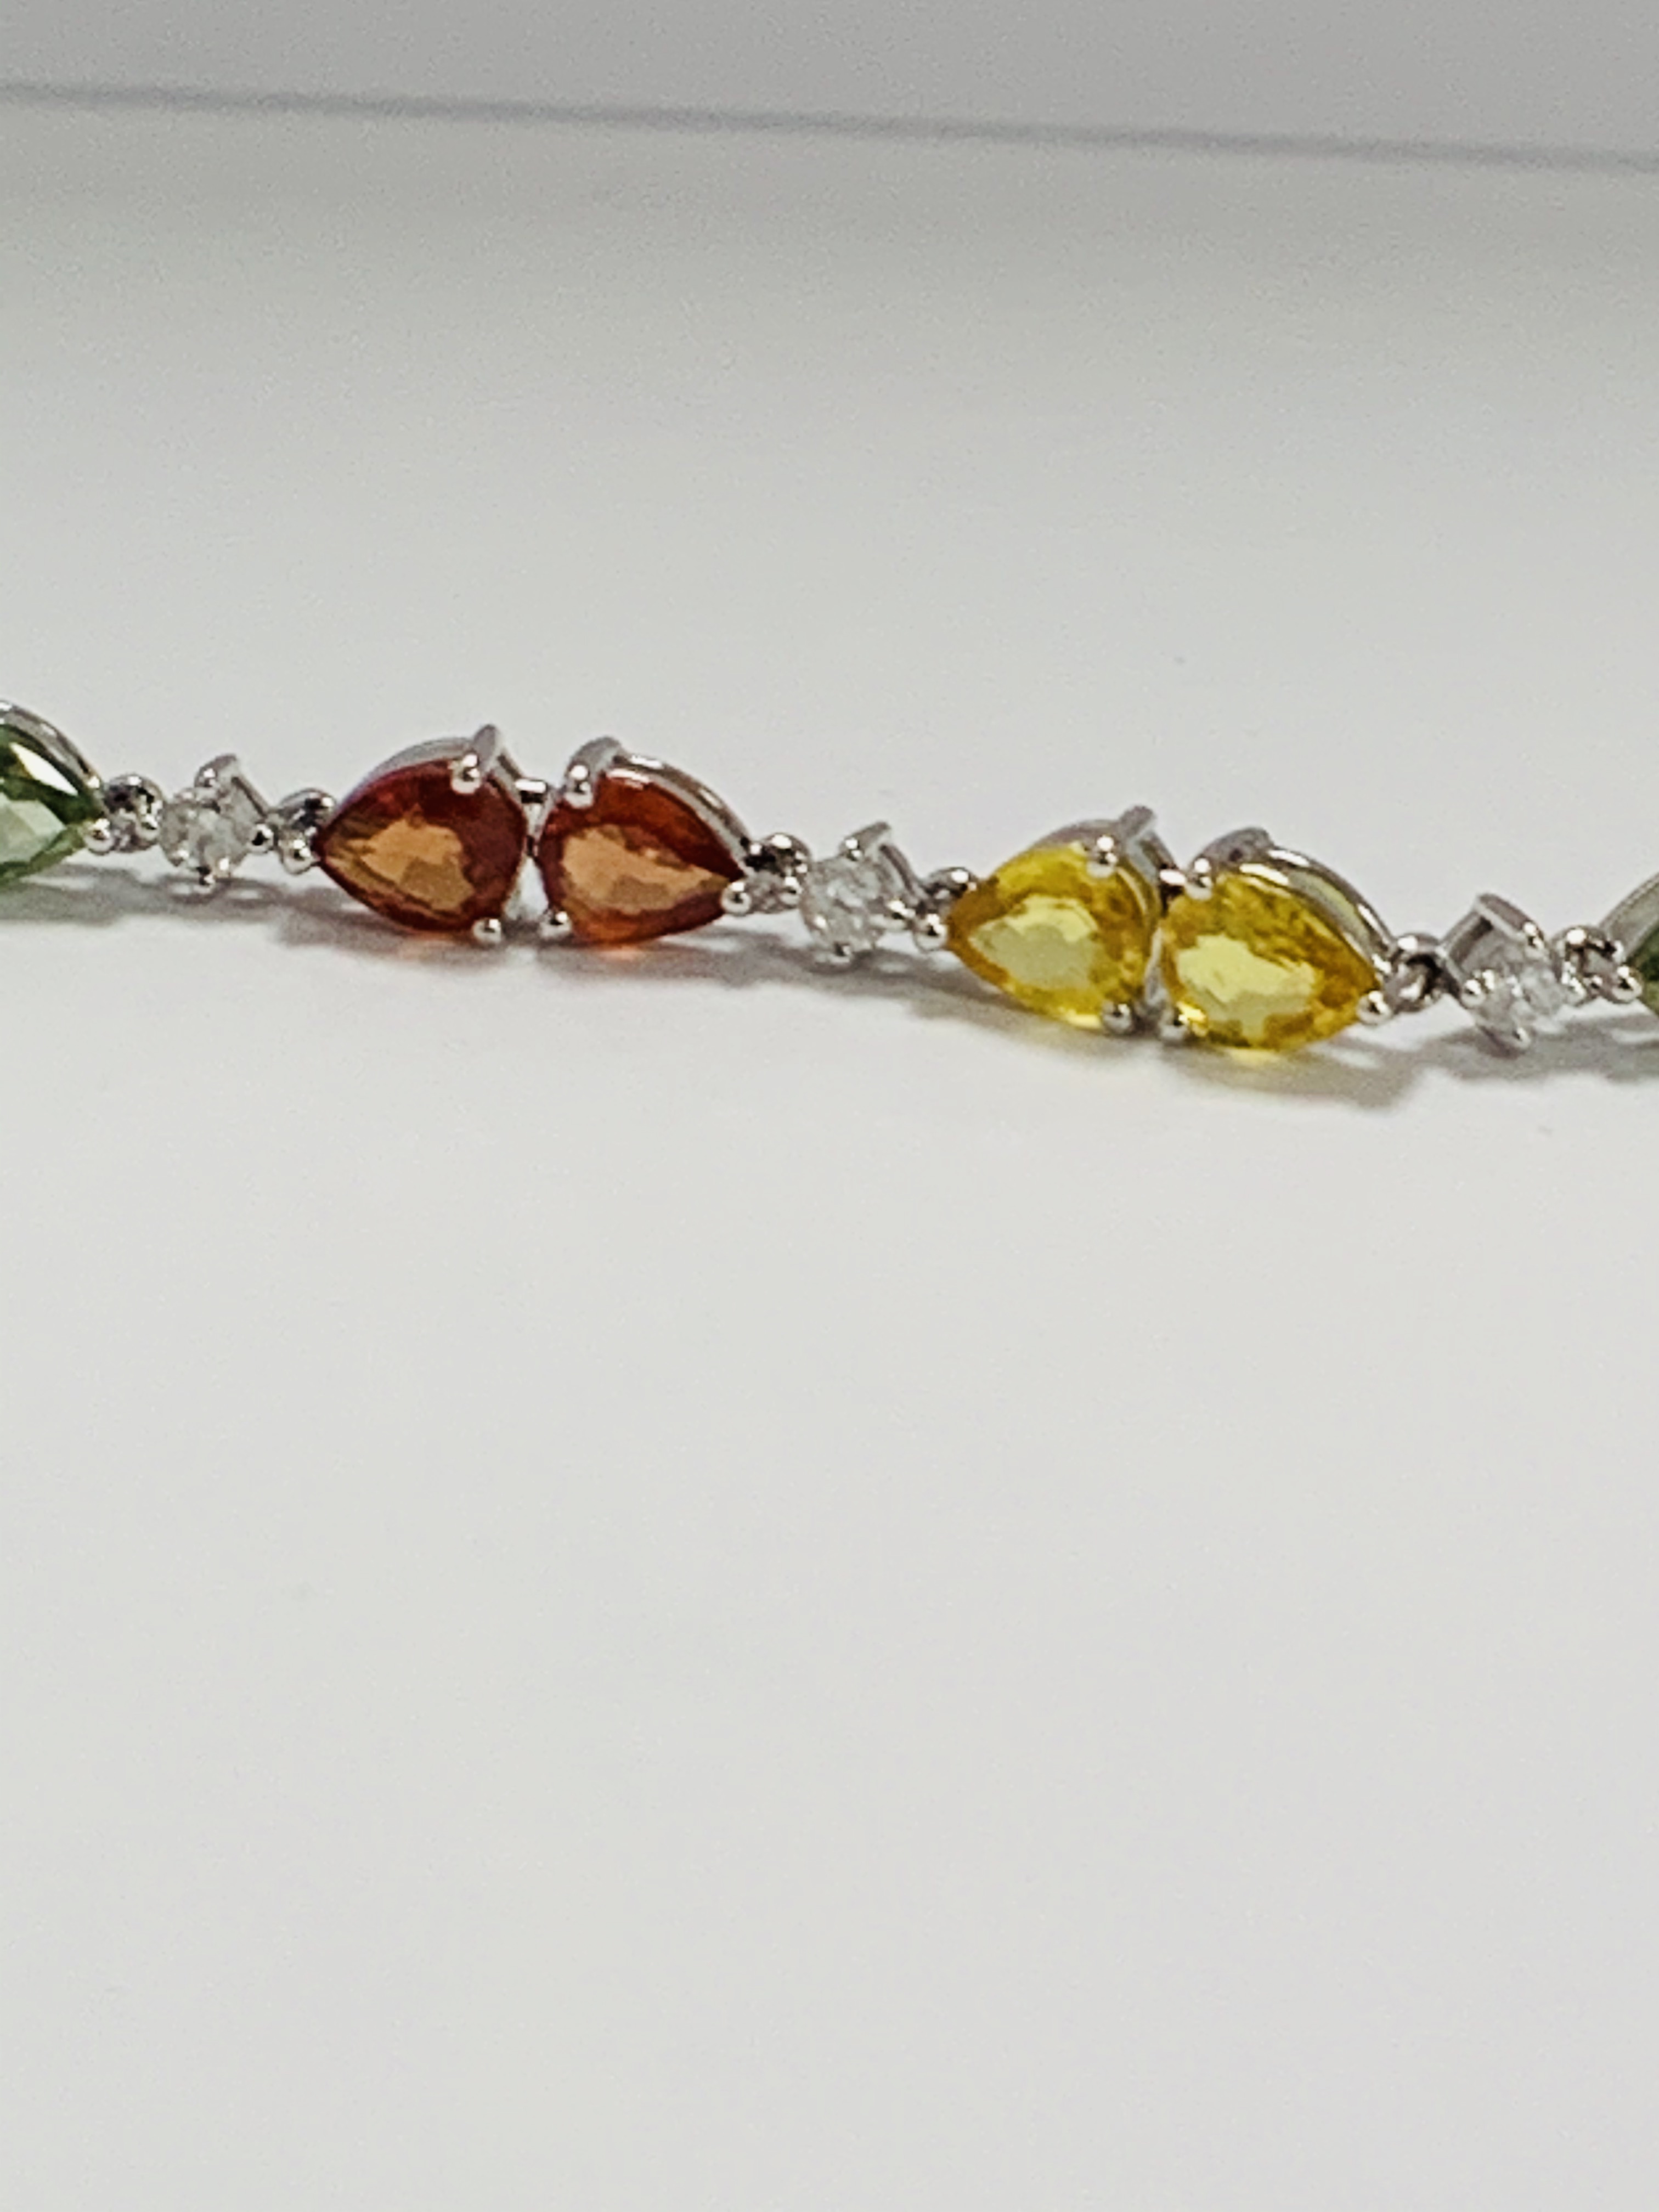 14ct White Gold Sapphire and Diamond bracelet featuring, 22 pear cut, yellow, green and orange Sapph - Image 7 of 24